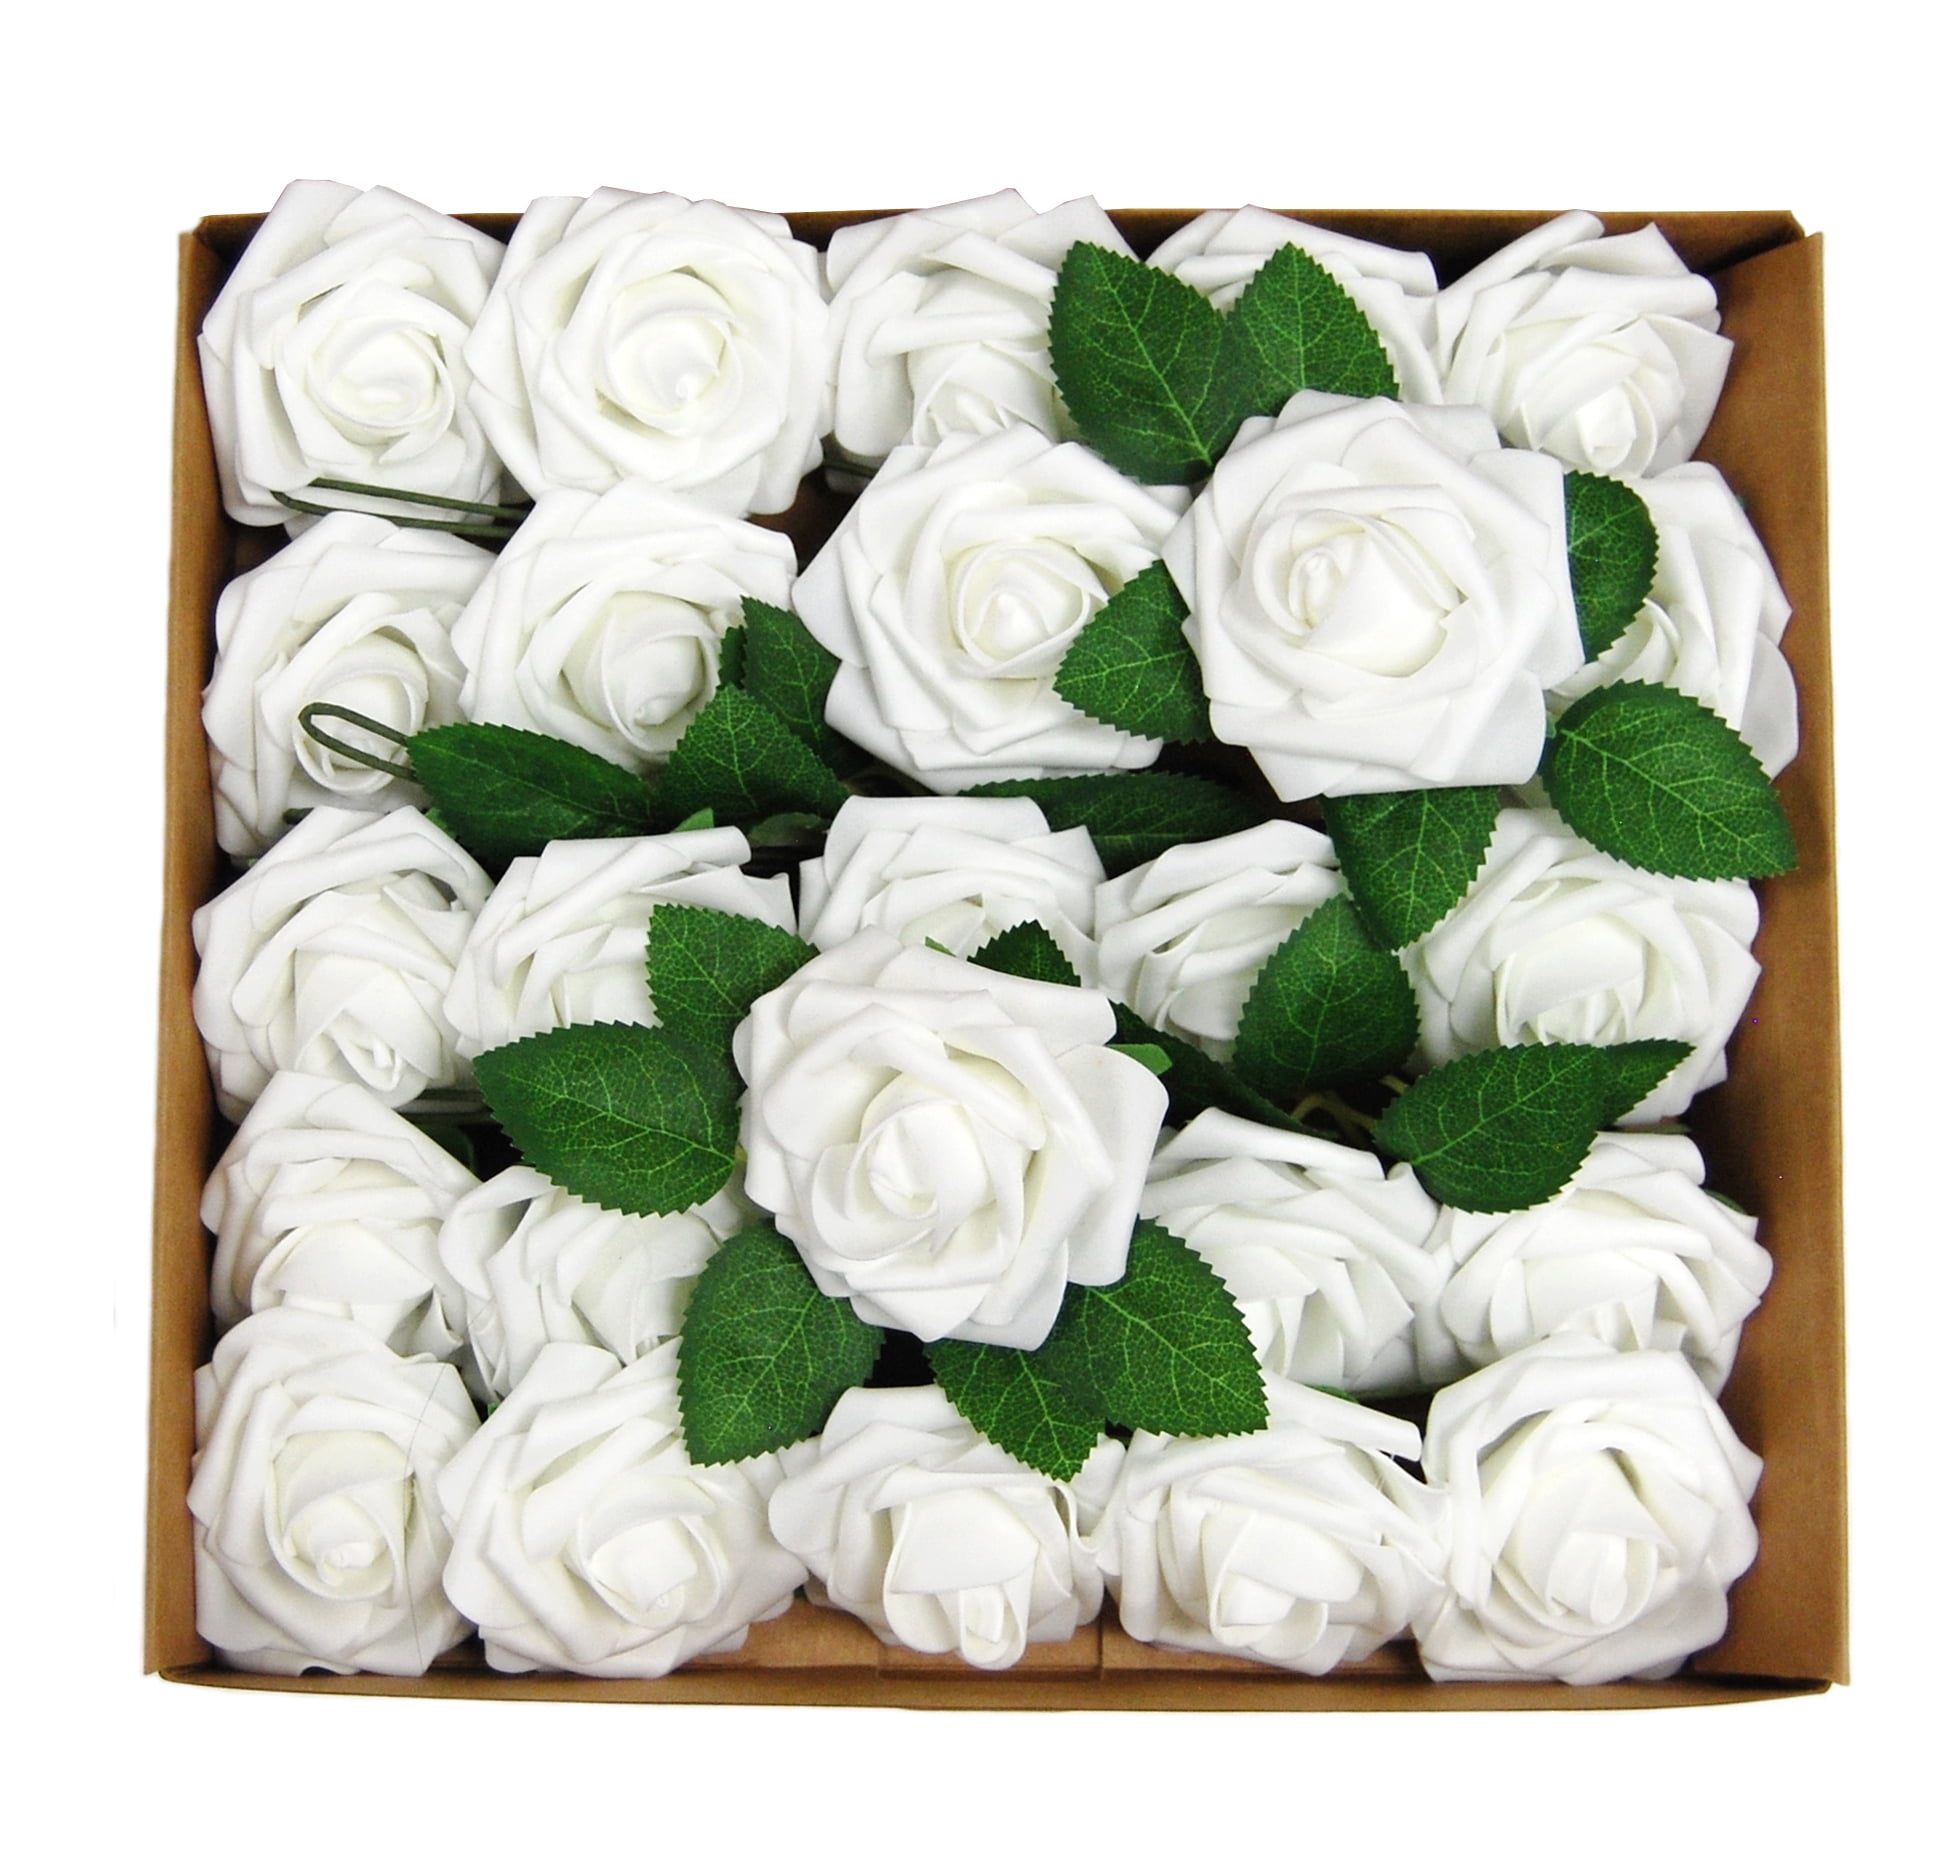 50-Pack Silver Rose Flower Heads for DIY Crafts, Artificial Stemless Roses for Wedding Decorations (3 Inches)